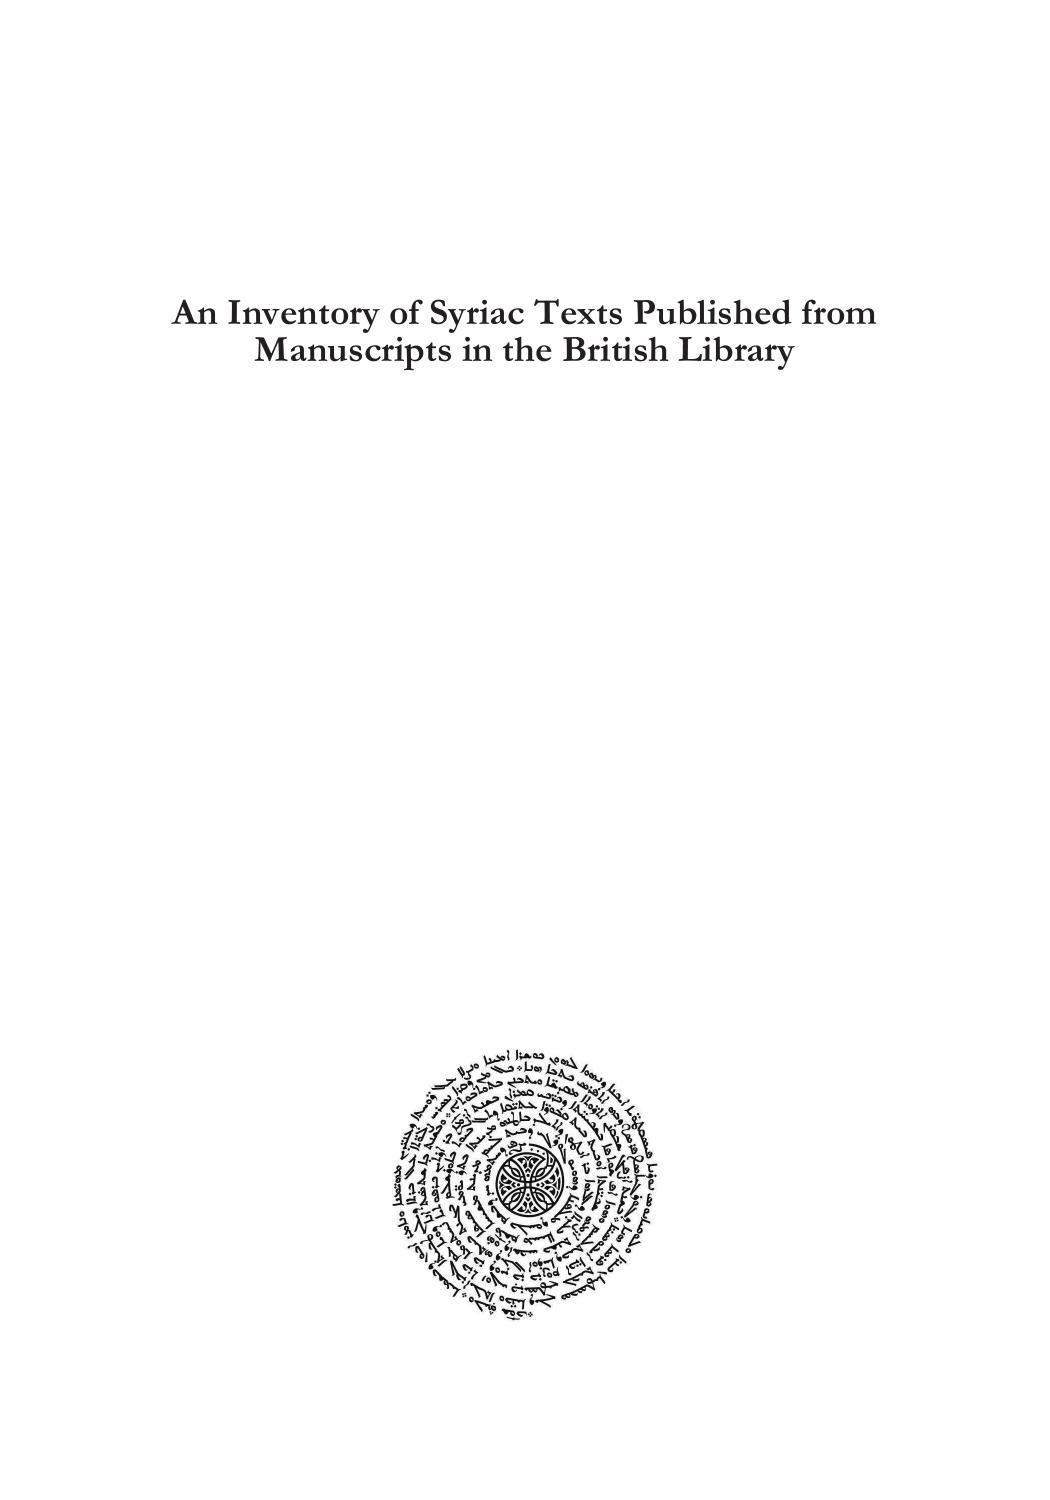 An Inventory of Syriac Texts Published from Manuscripts in the British Library by Sebastian P. Brock